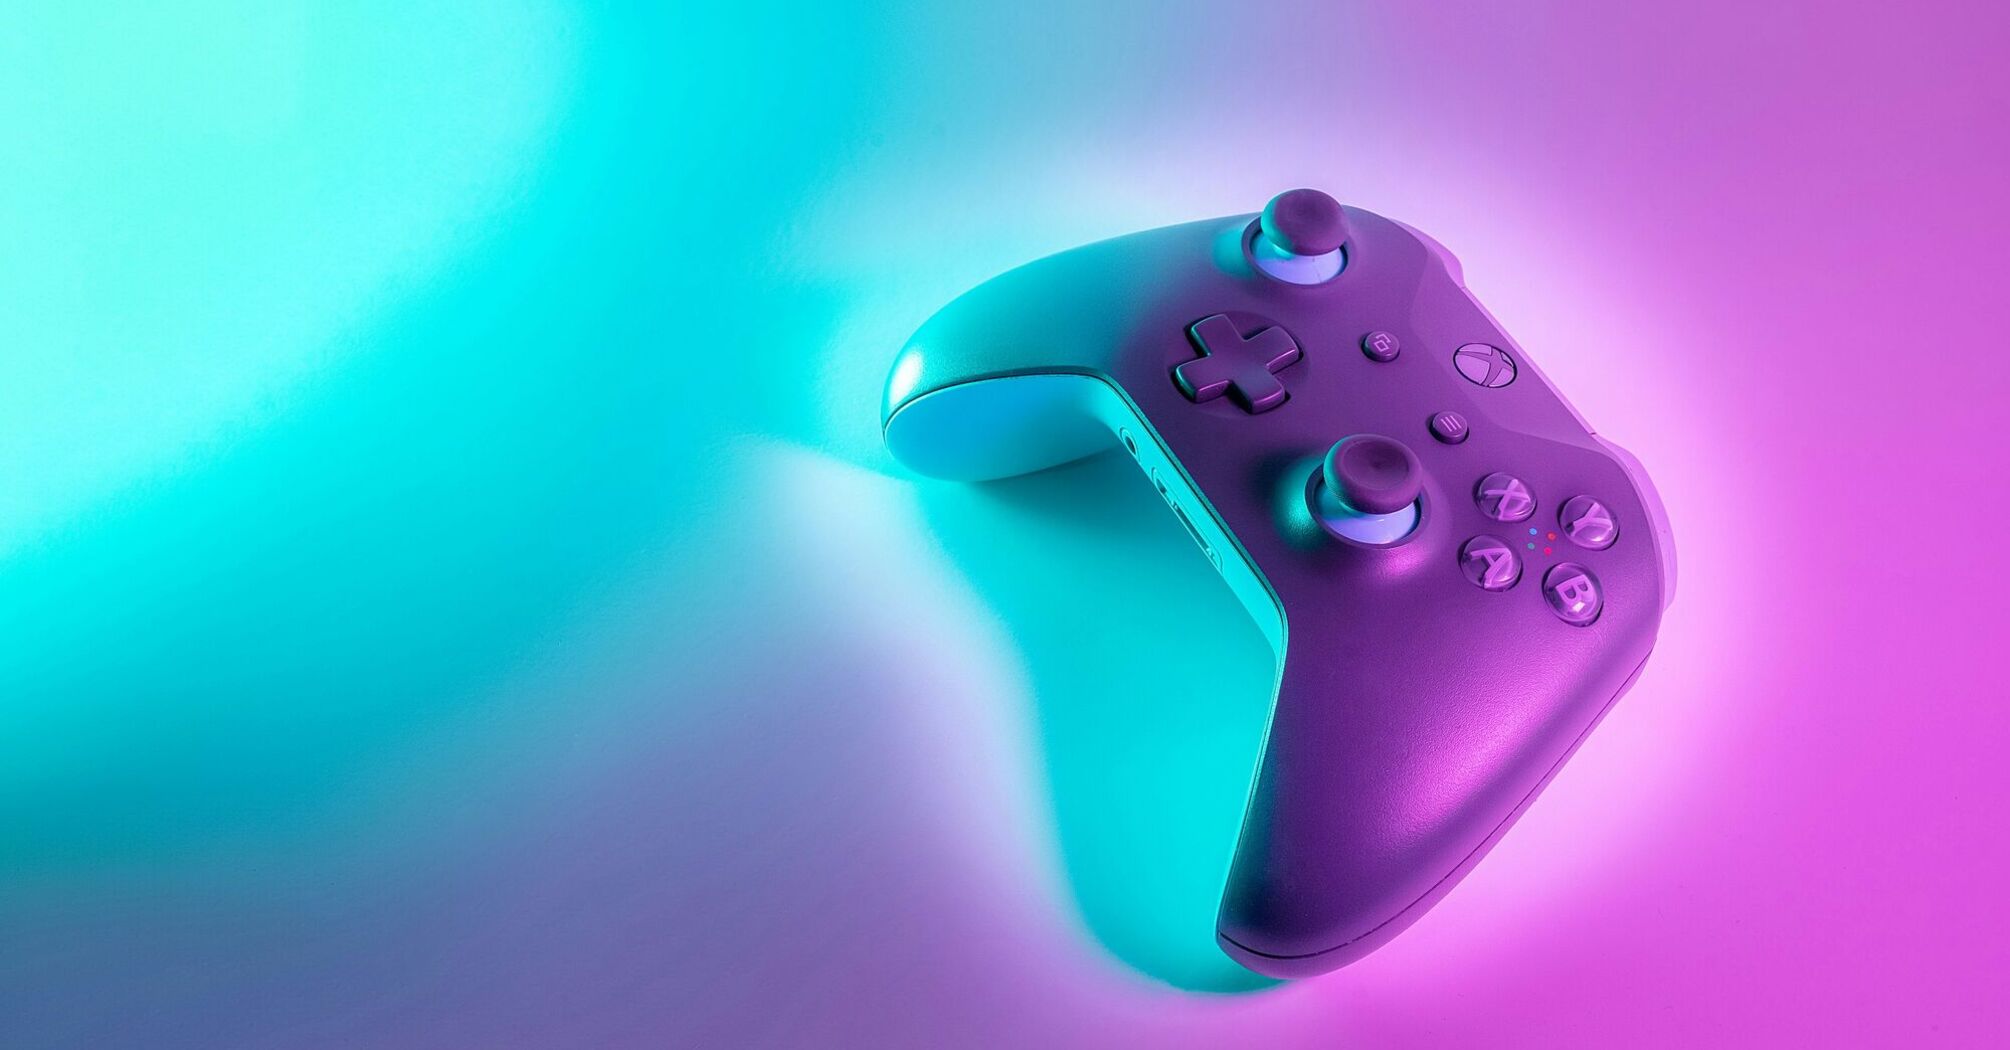 A colorful game controller with a gradient from purple to teal on a dual-tone background of the same colors